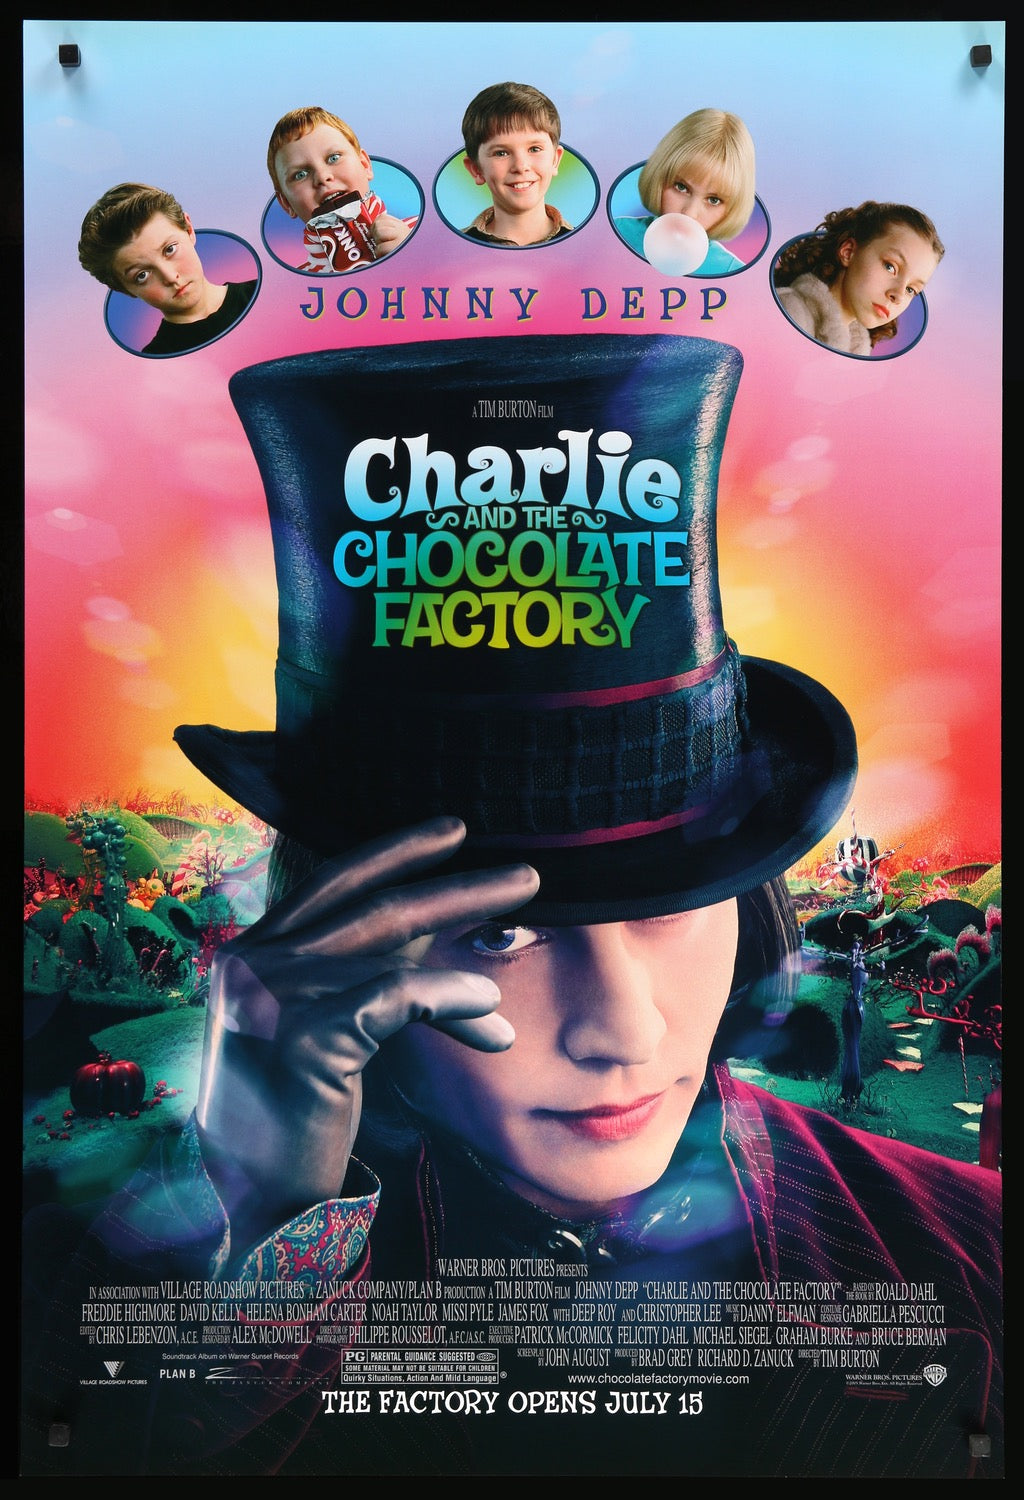 Charlie and the Chocolate Factory (2005) original movie poster for sale at Original Film Art